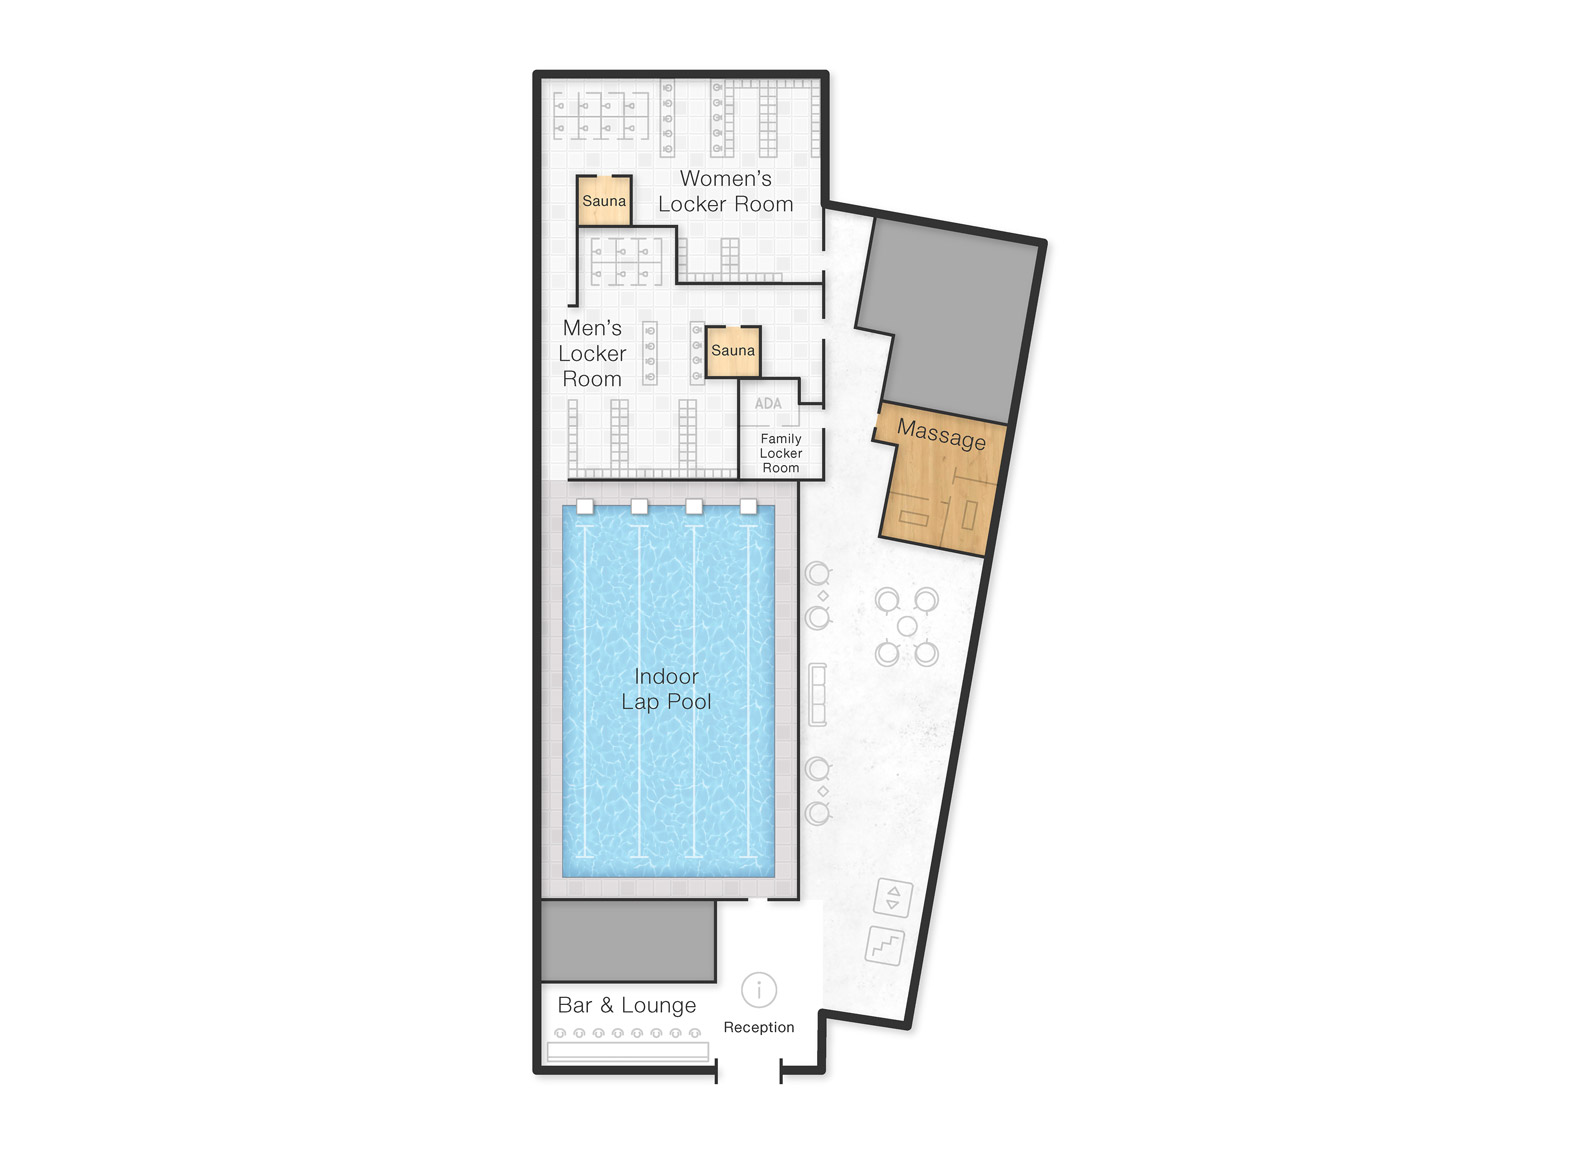 floor one at life time wellington station featuring locker rooms, indoor lap pool, sauna and massage room, bar and lounge and reception desk.